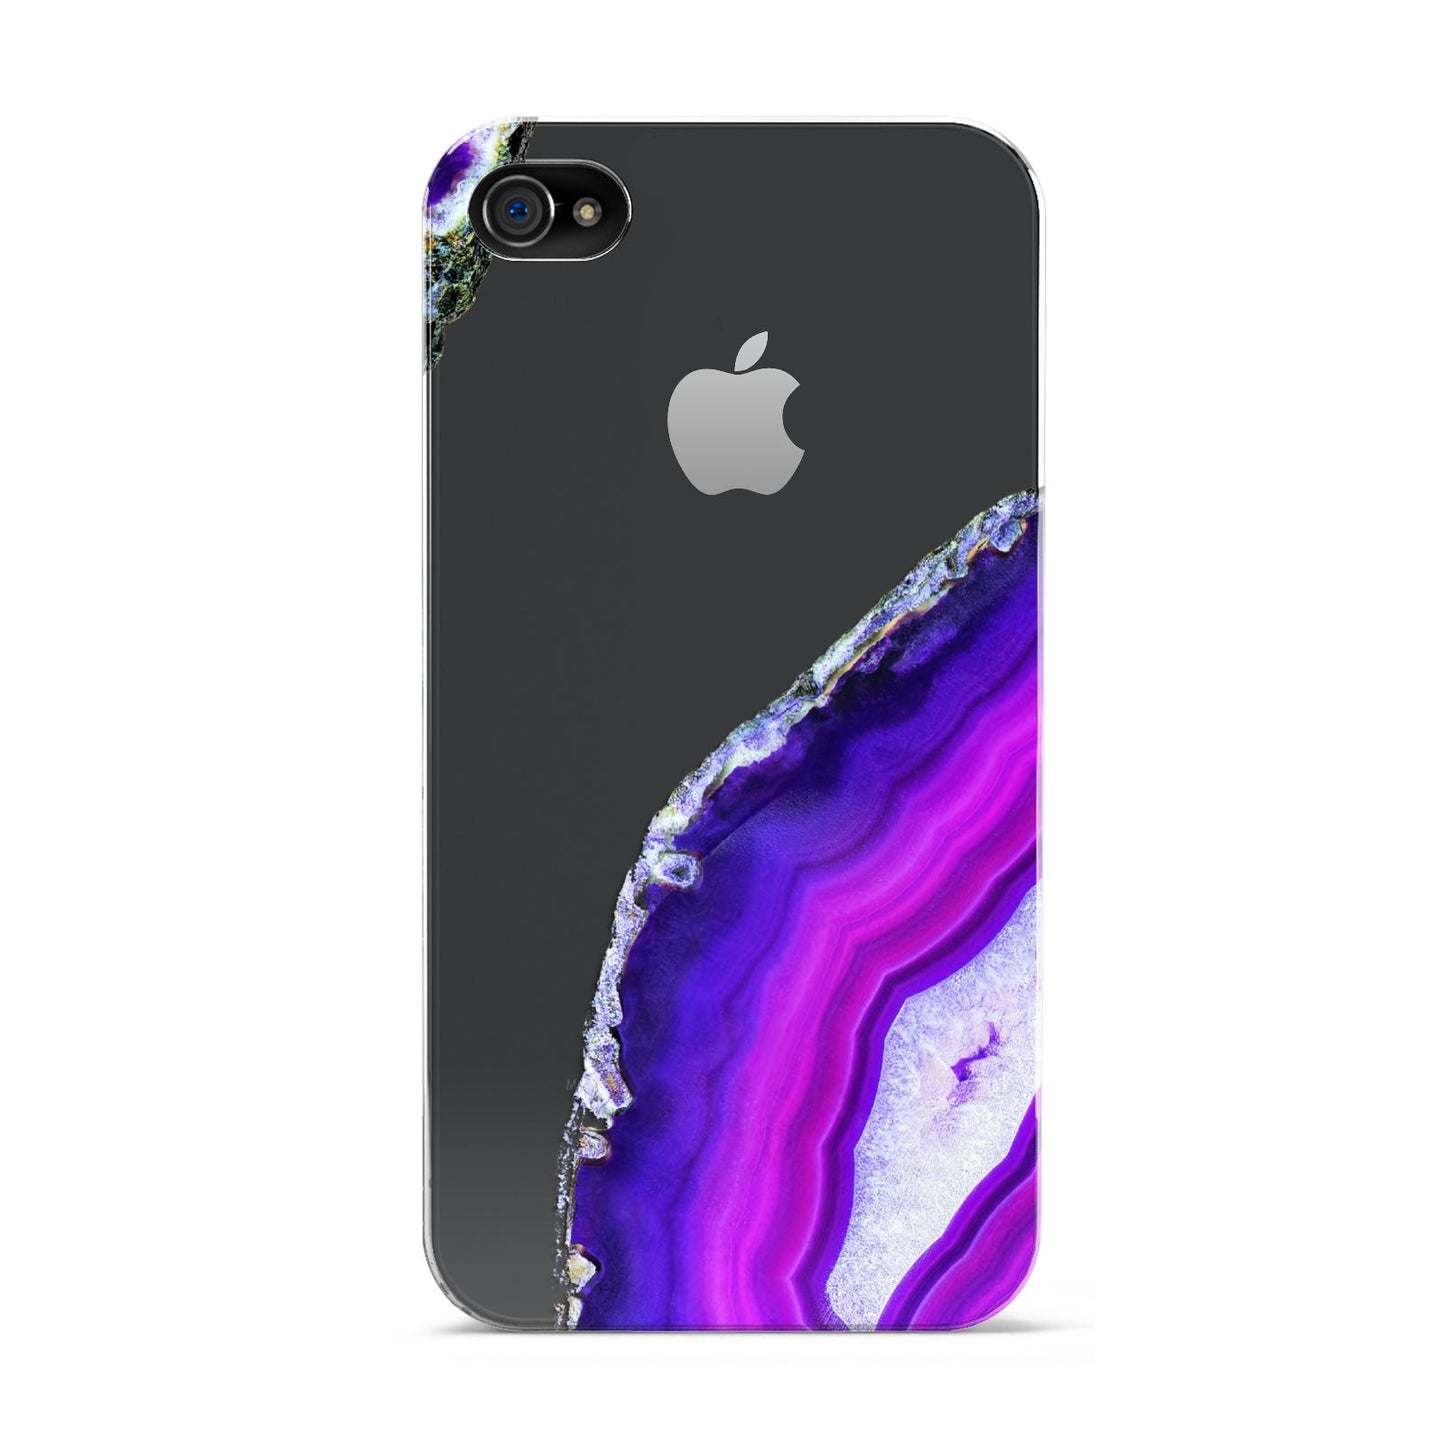 Agate Purple and Pink Apple iPhone 4s Case